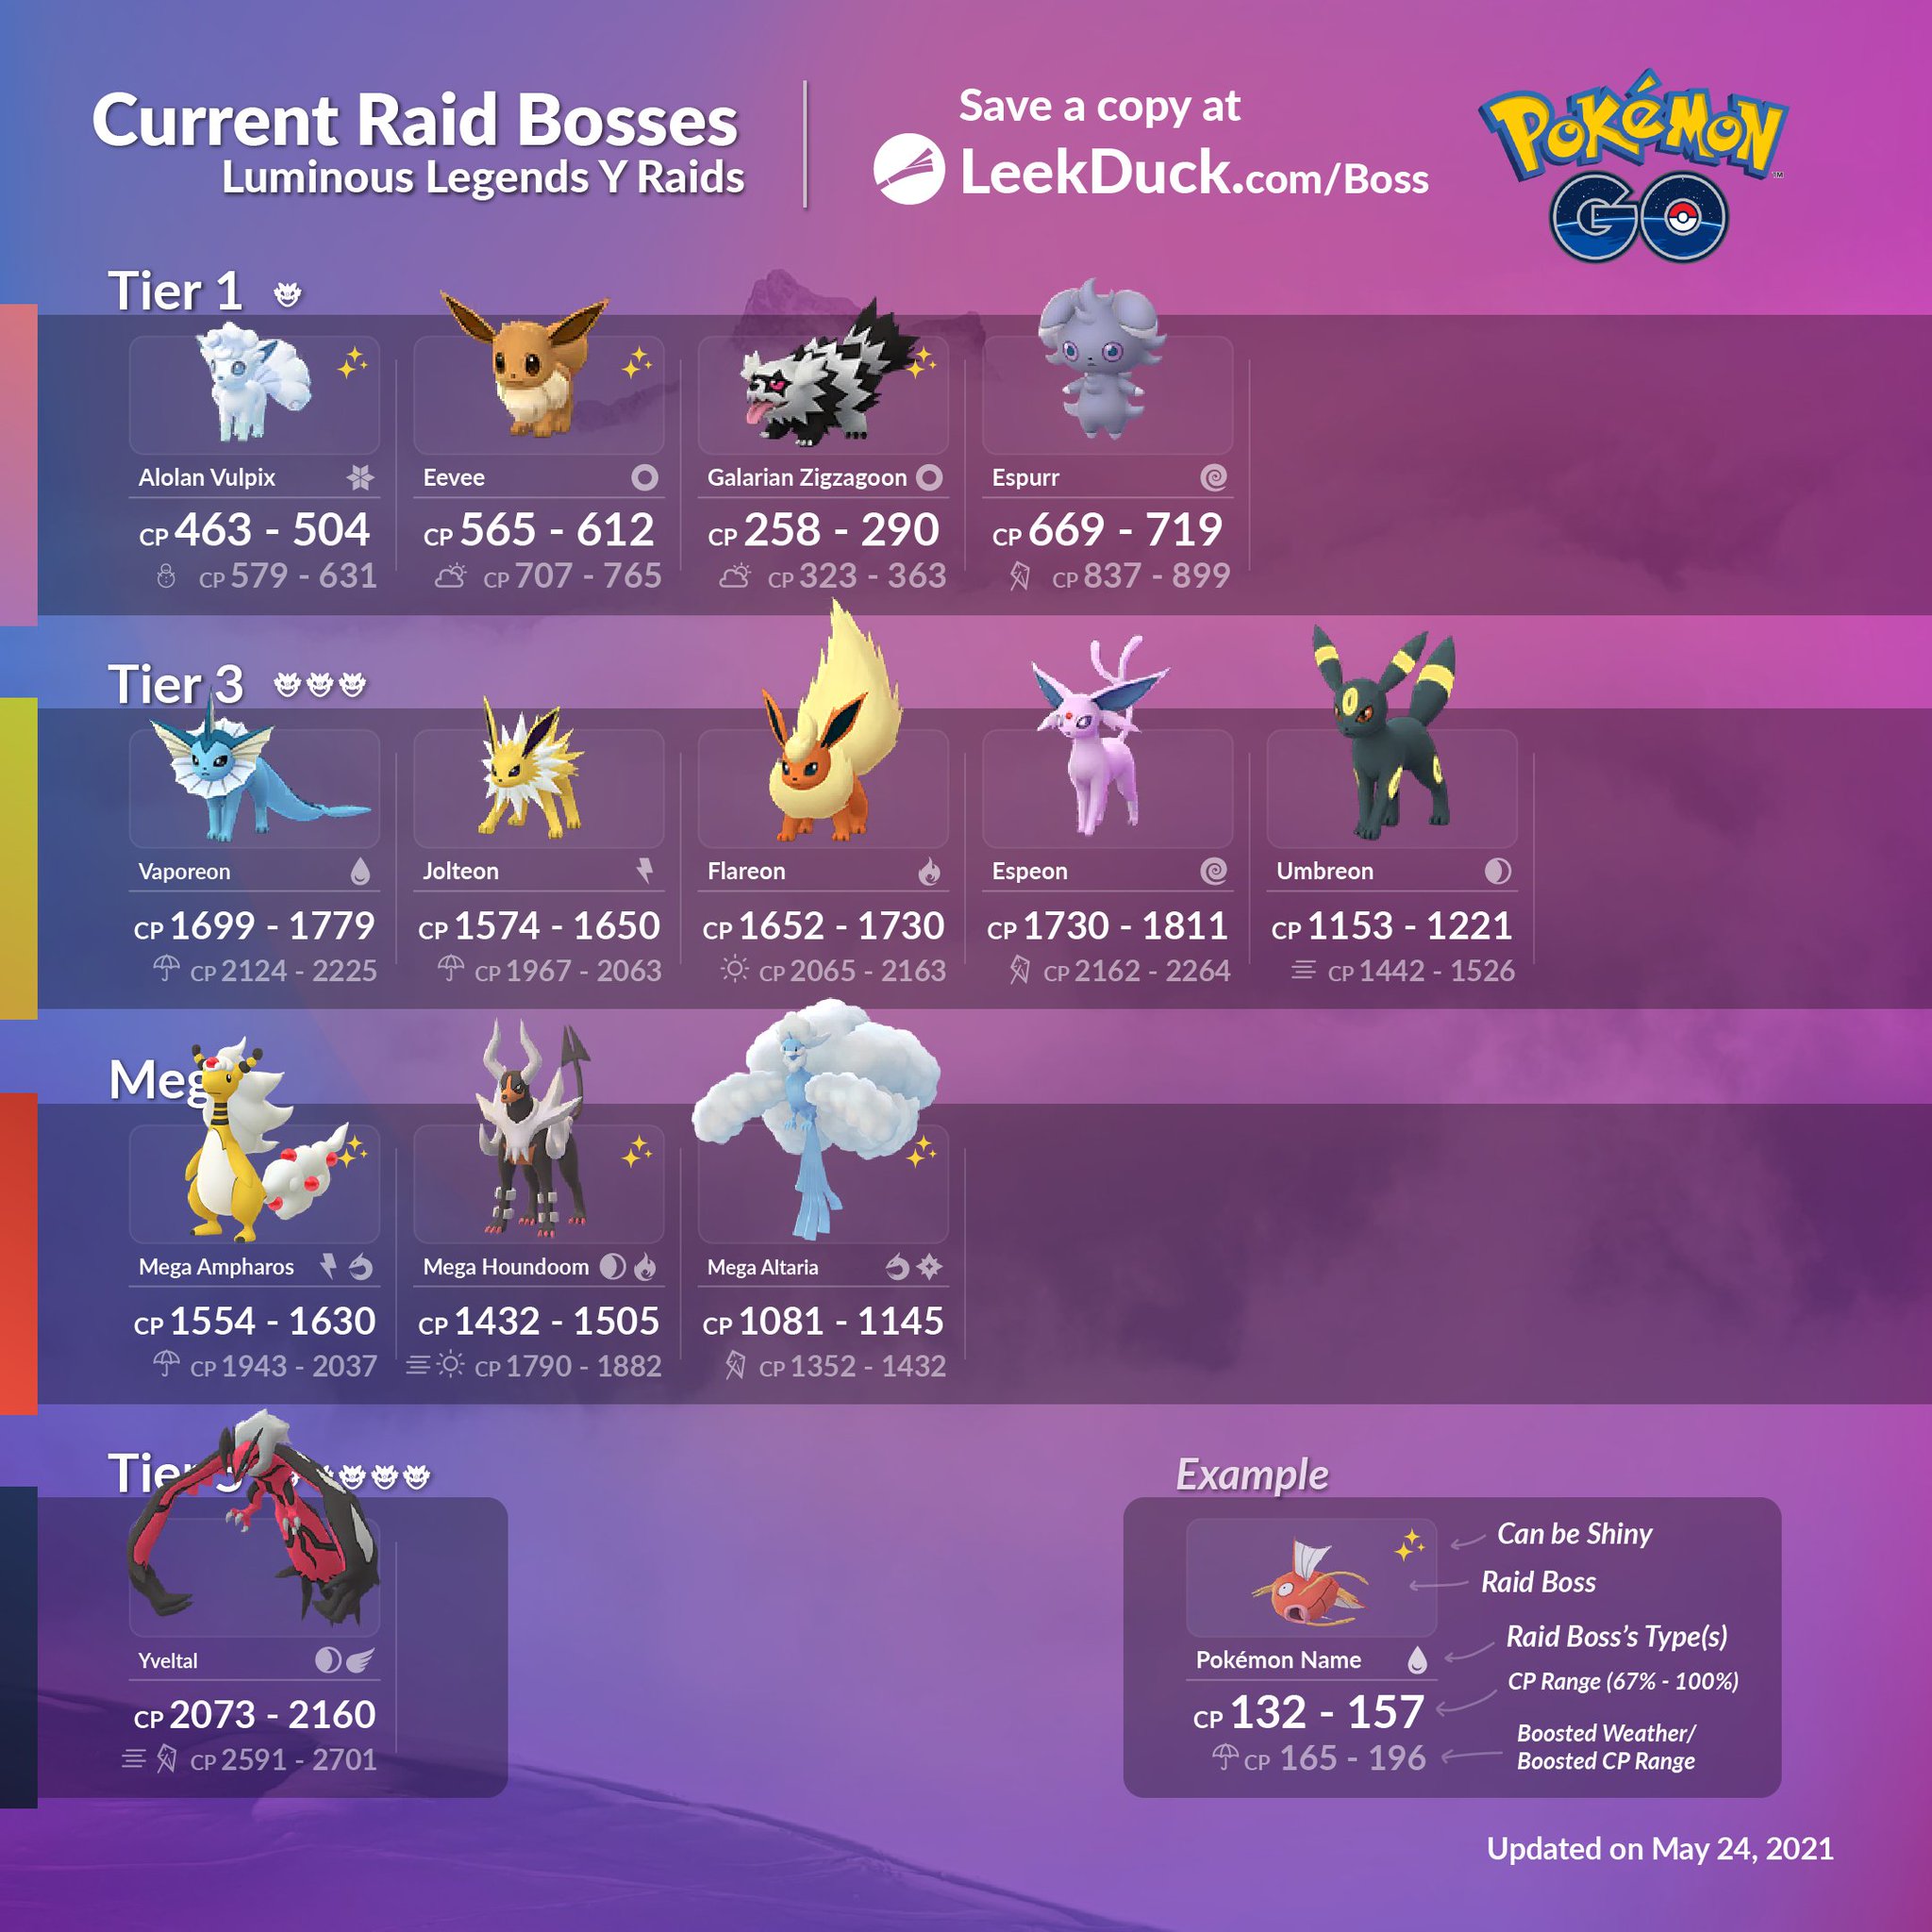 virksomhed kristen sikkert Leek Duck on Twitter: "Upcoming/Current Raid Bosses - Luminous Legends Y -  Part 2 • These raid bosses will be available after the start of Luminous  Legends Y - Part 2 on